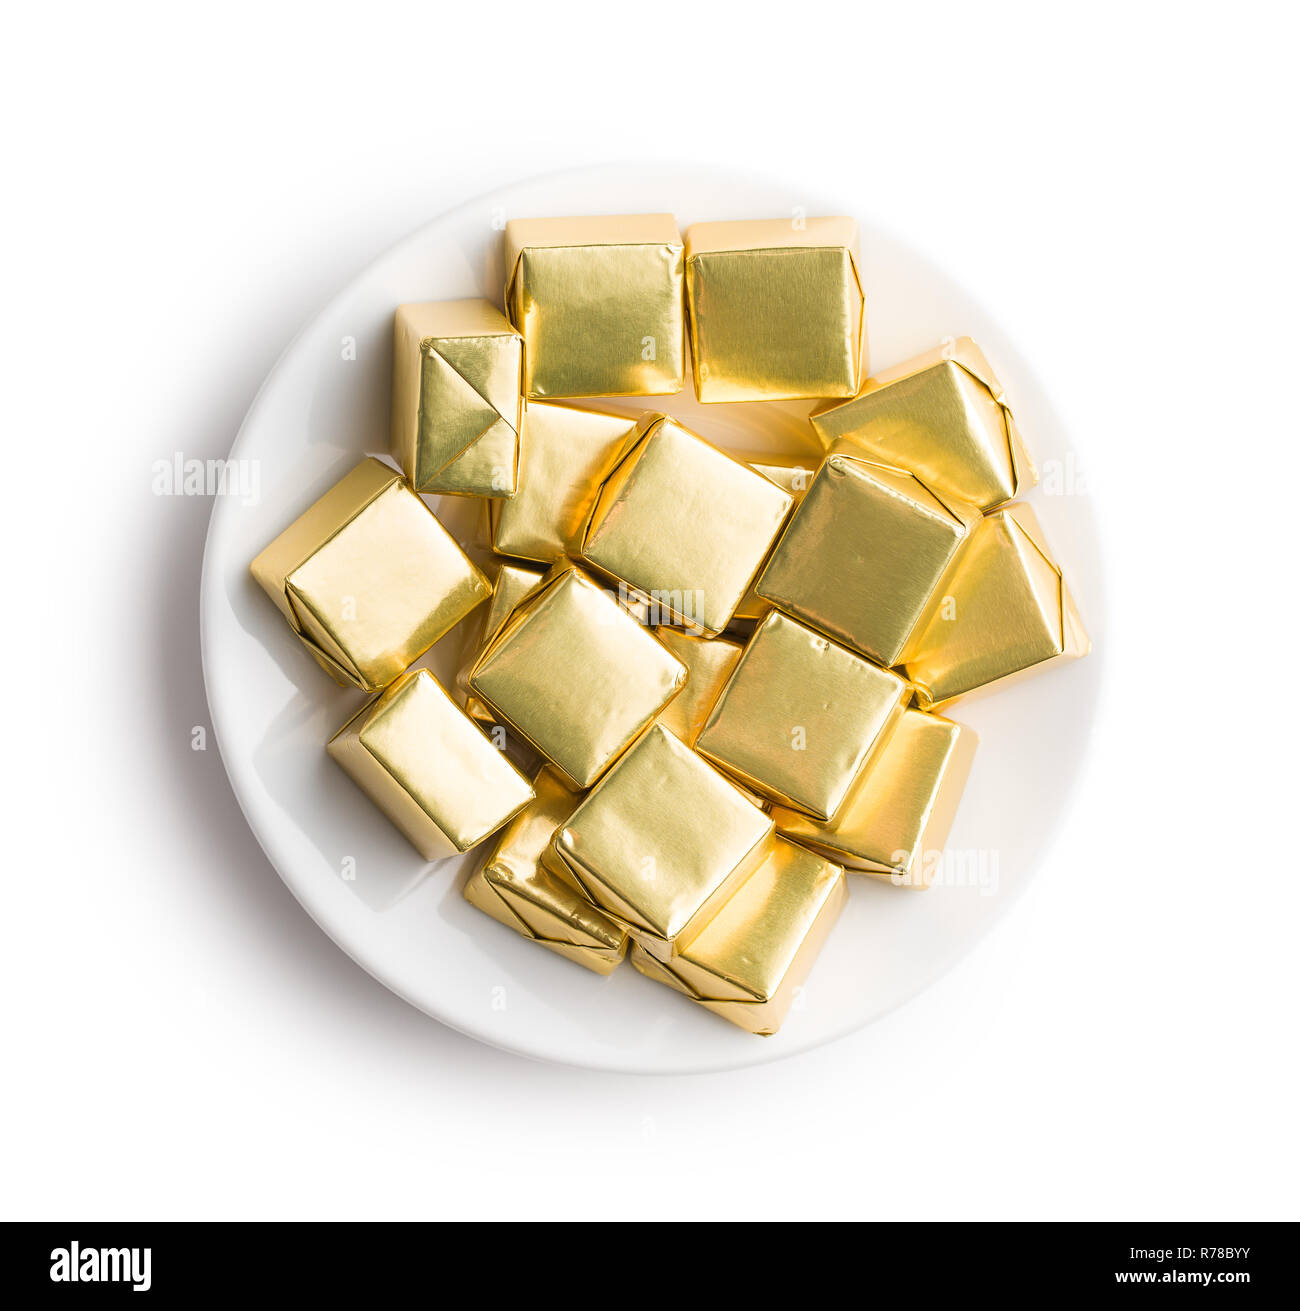 Wrapped nougat candy Stock Photo